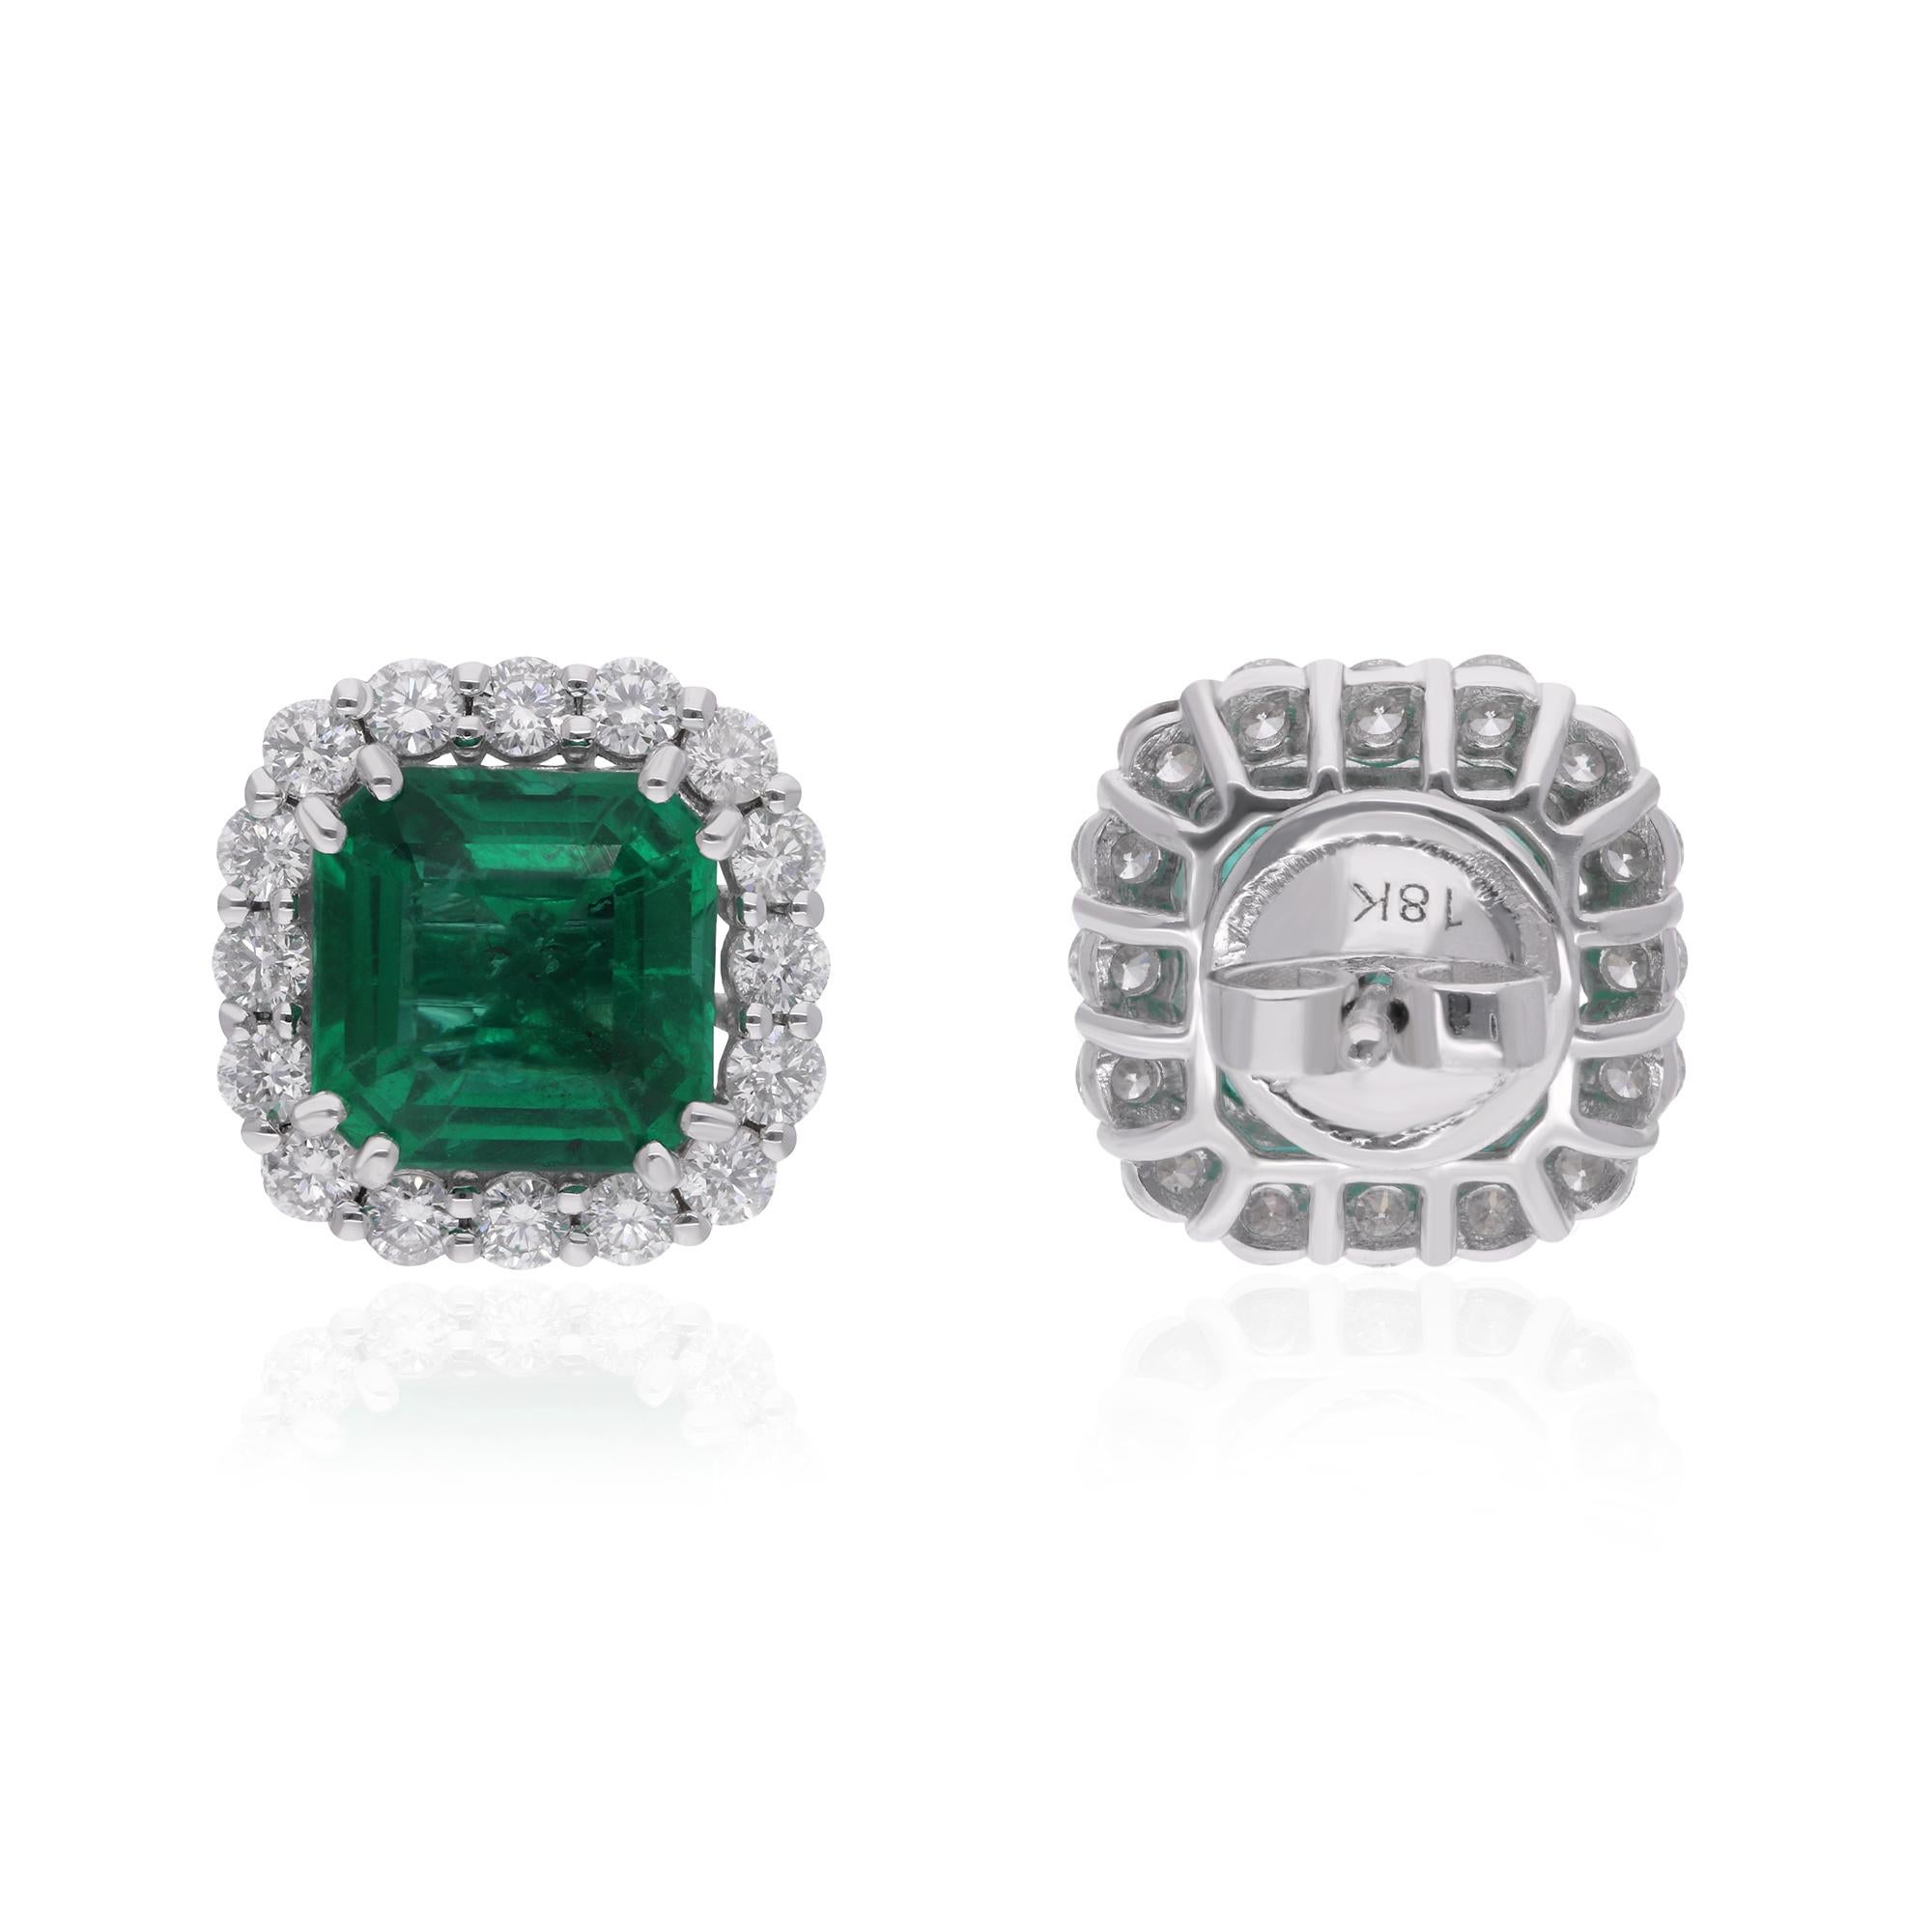 The classic stud earring design ensures these earrings are both timeless and versatile, making them the perfect accessory for any occasion, from formal events to everyday wear. Crafted with care and attention to detail, these Zambian Emerald